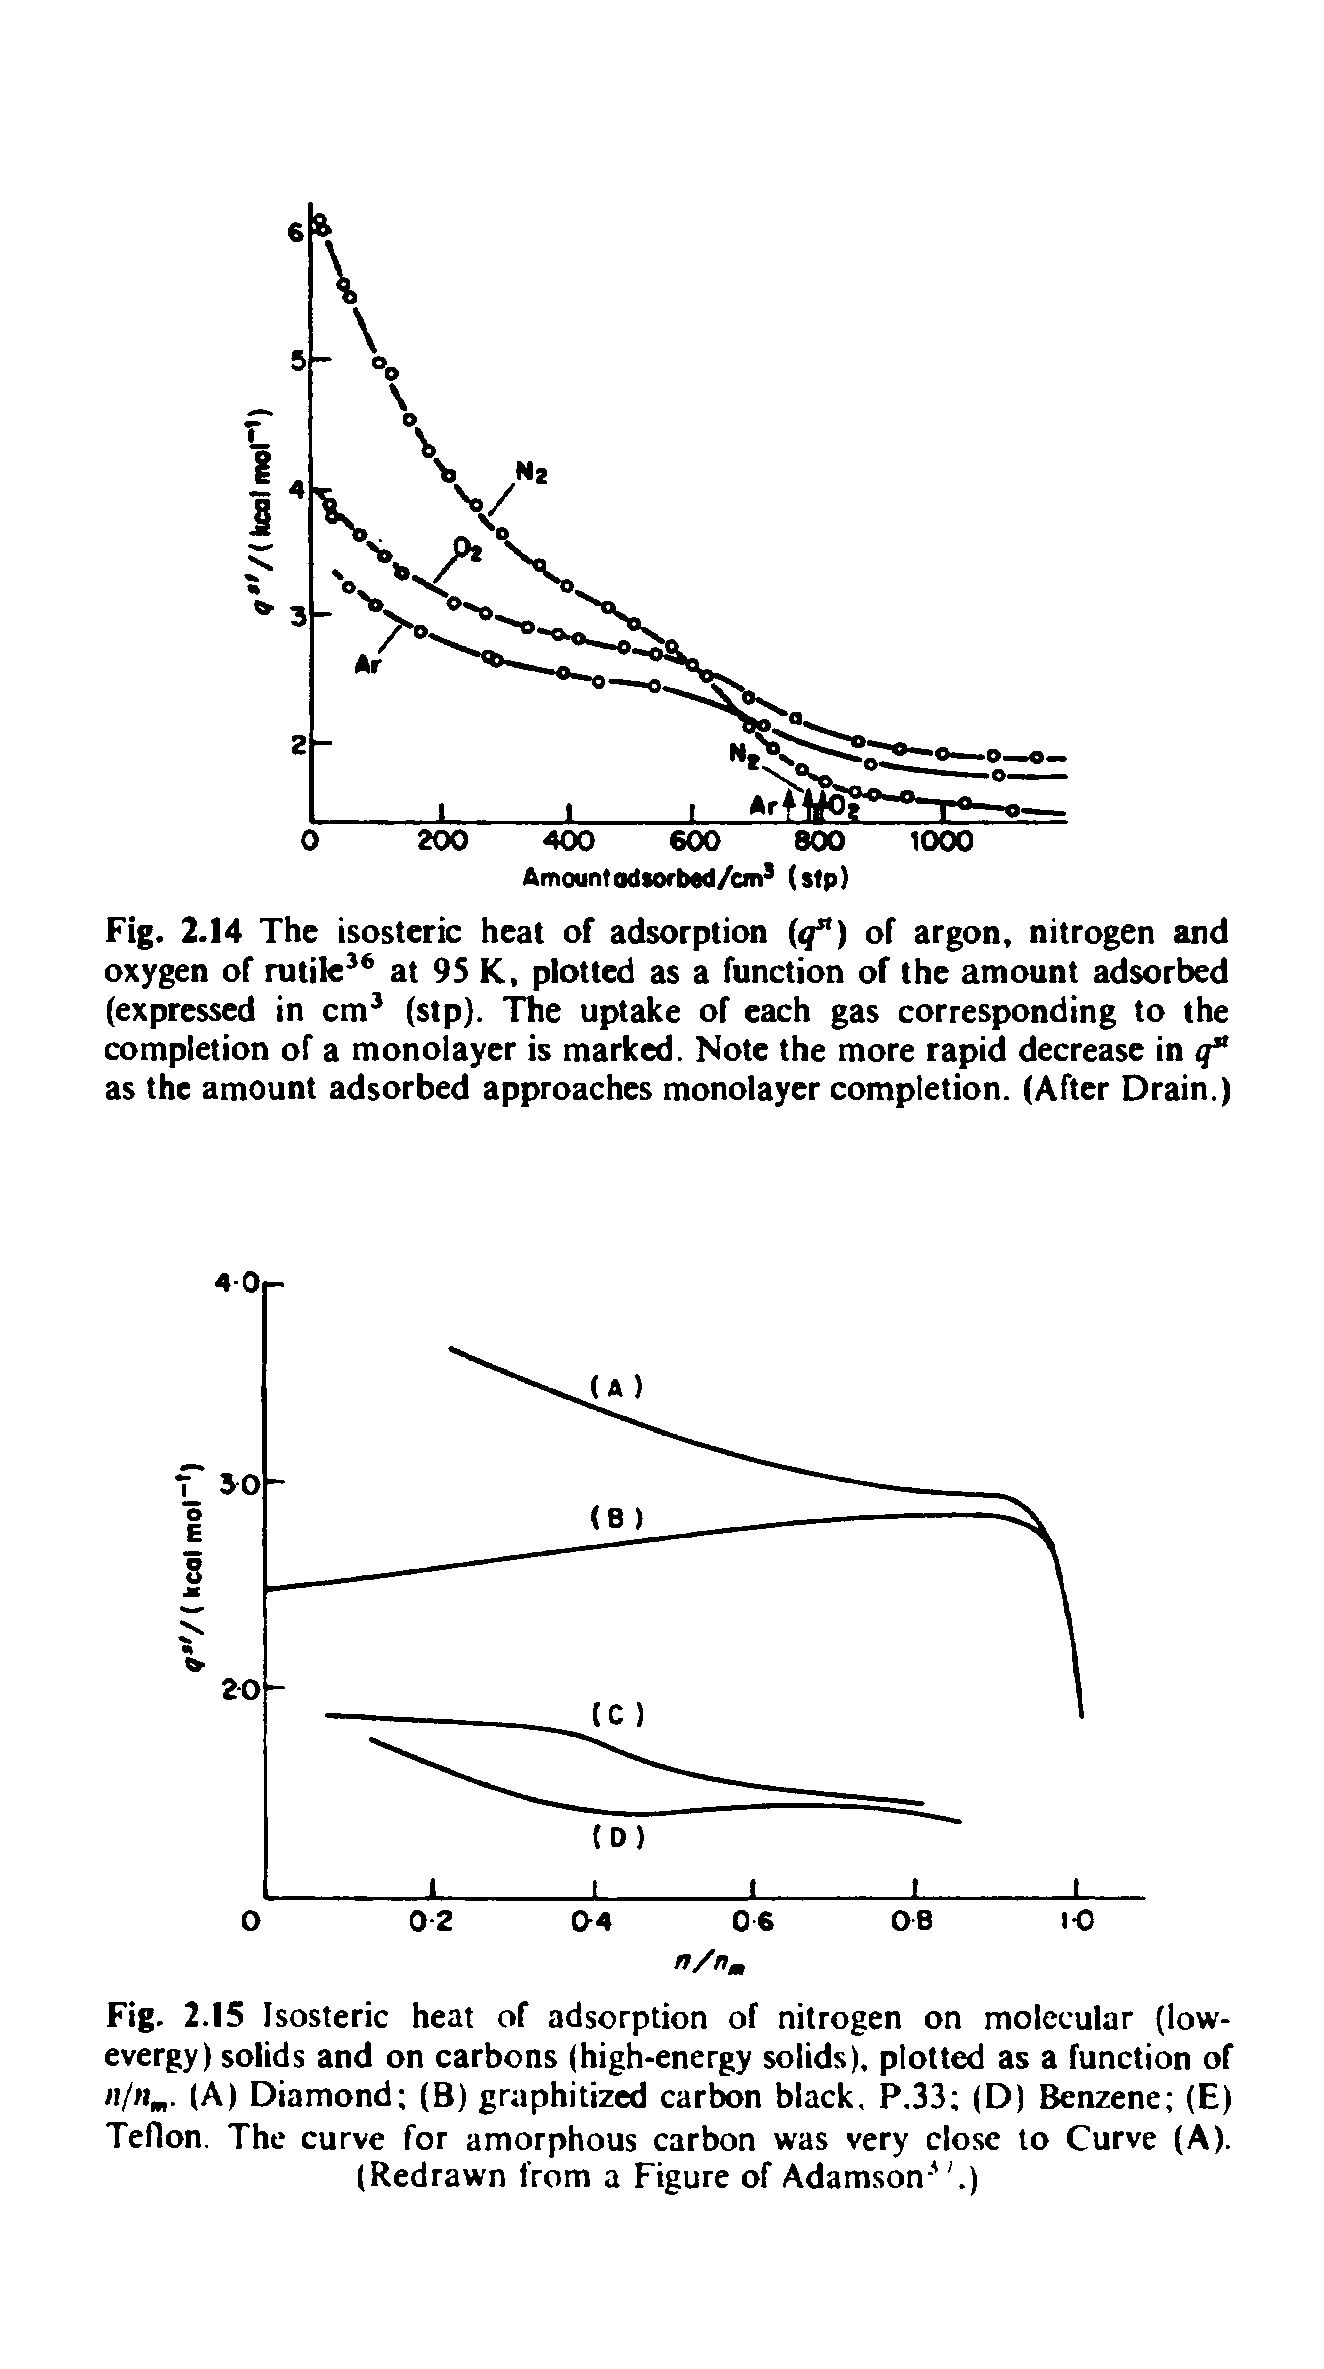 Fig. 2.15 Isosteric heat of adsorption of nitrogen on molecular (low-evergy) solids and on carbons (high-energy solids), plotted as a function of i/n . (A) Diamond (B) gruphitized carbon black. P.33 (D) Benzene (E) Teflon. The curve for amorphous carbon was very close to Curve (A). (Redrawn from a Figure of Adamson . )...